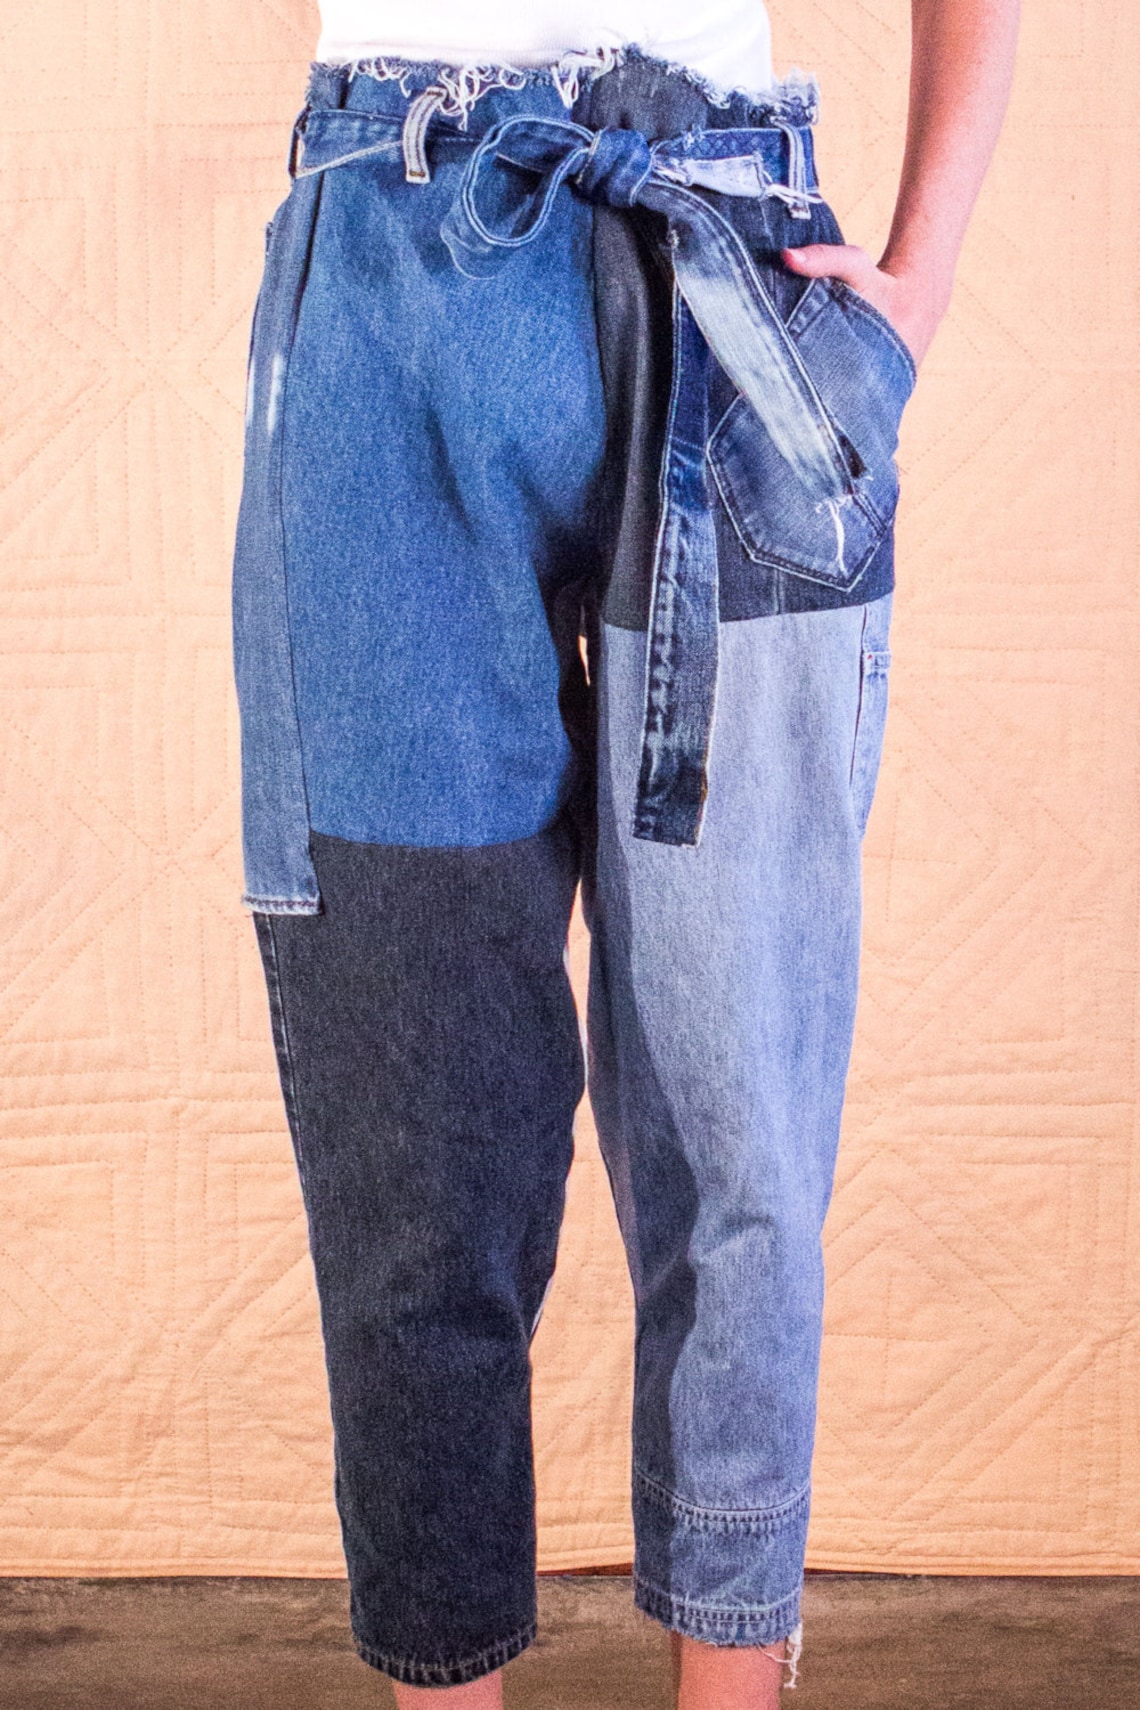 Handmade Recycled Denim Patchwork Pants by Silkdenim 1 of a - Etsy